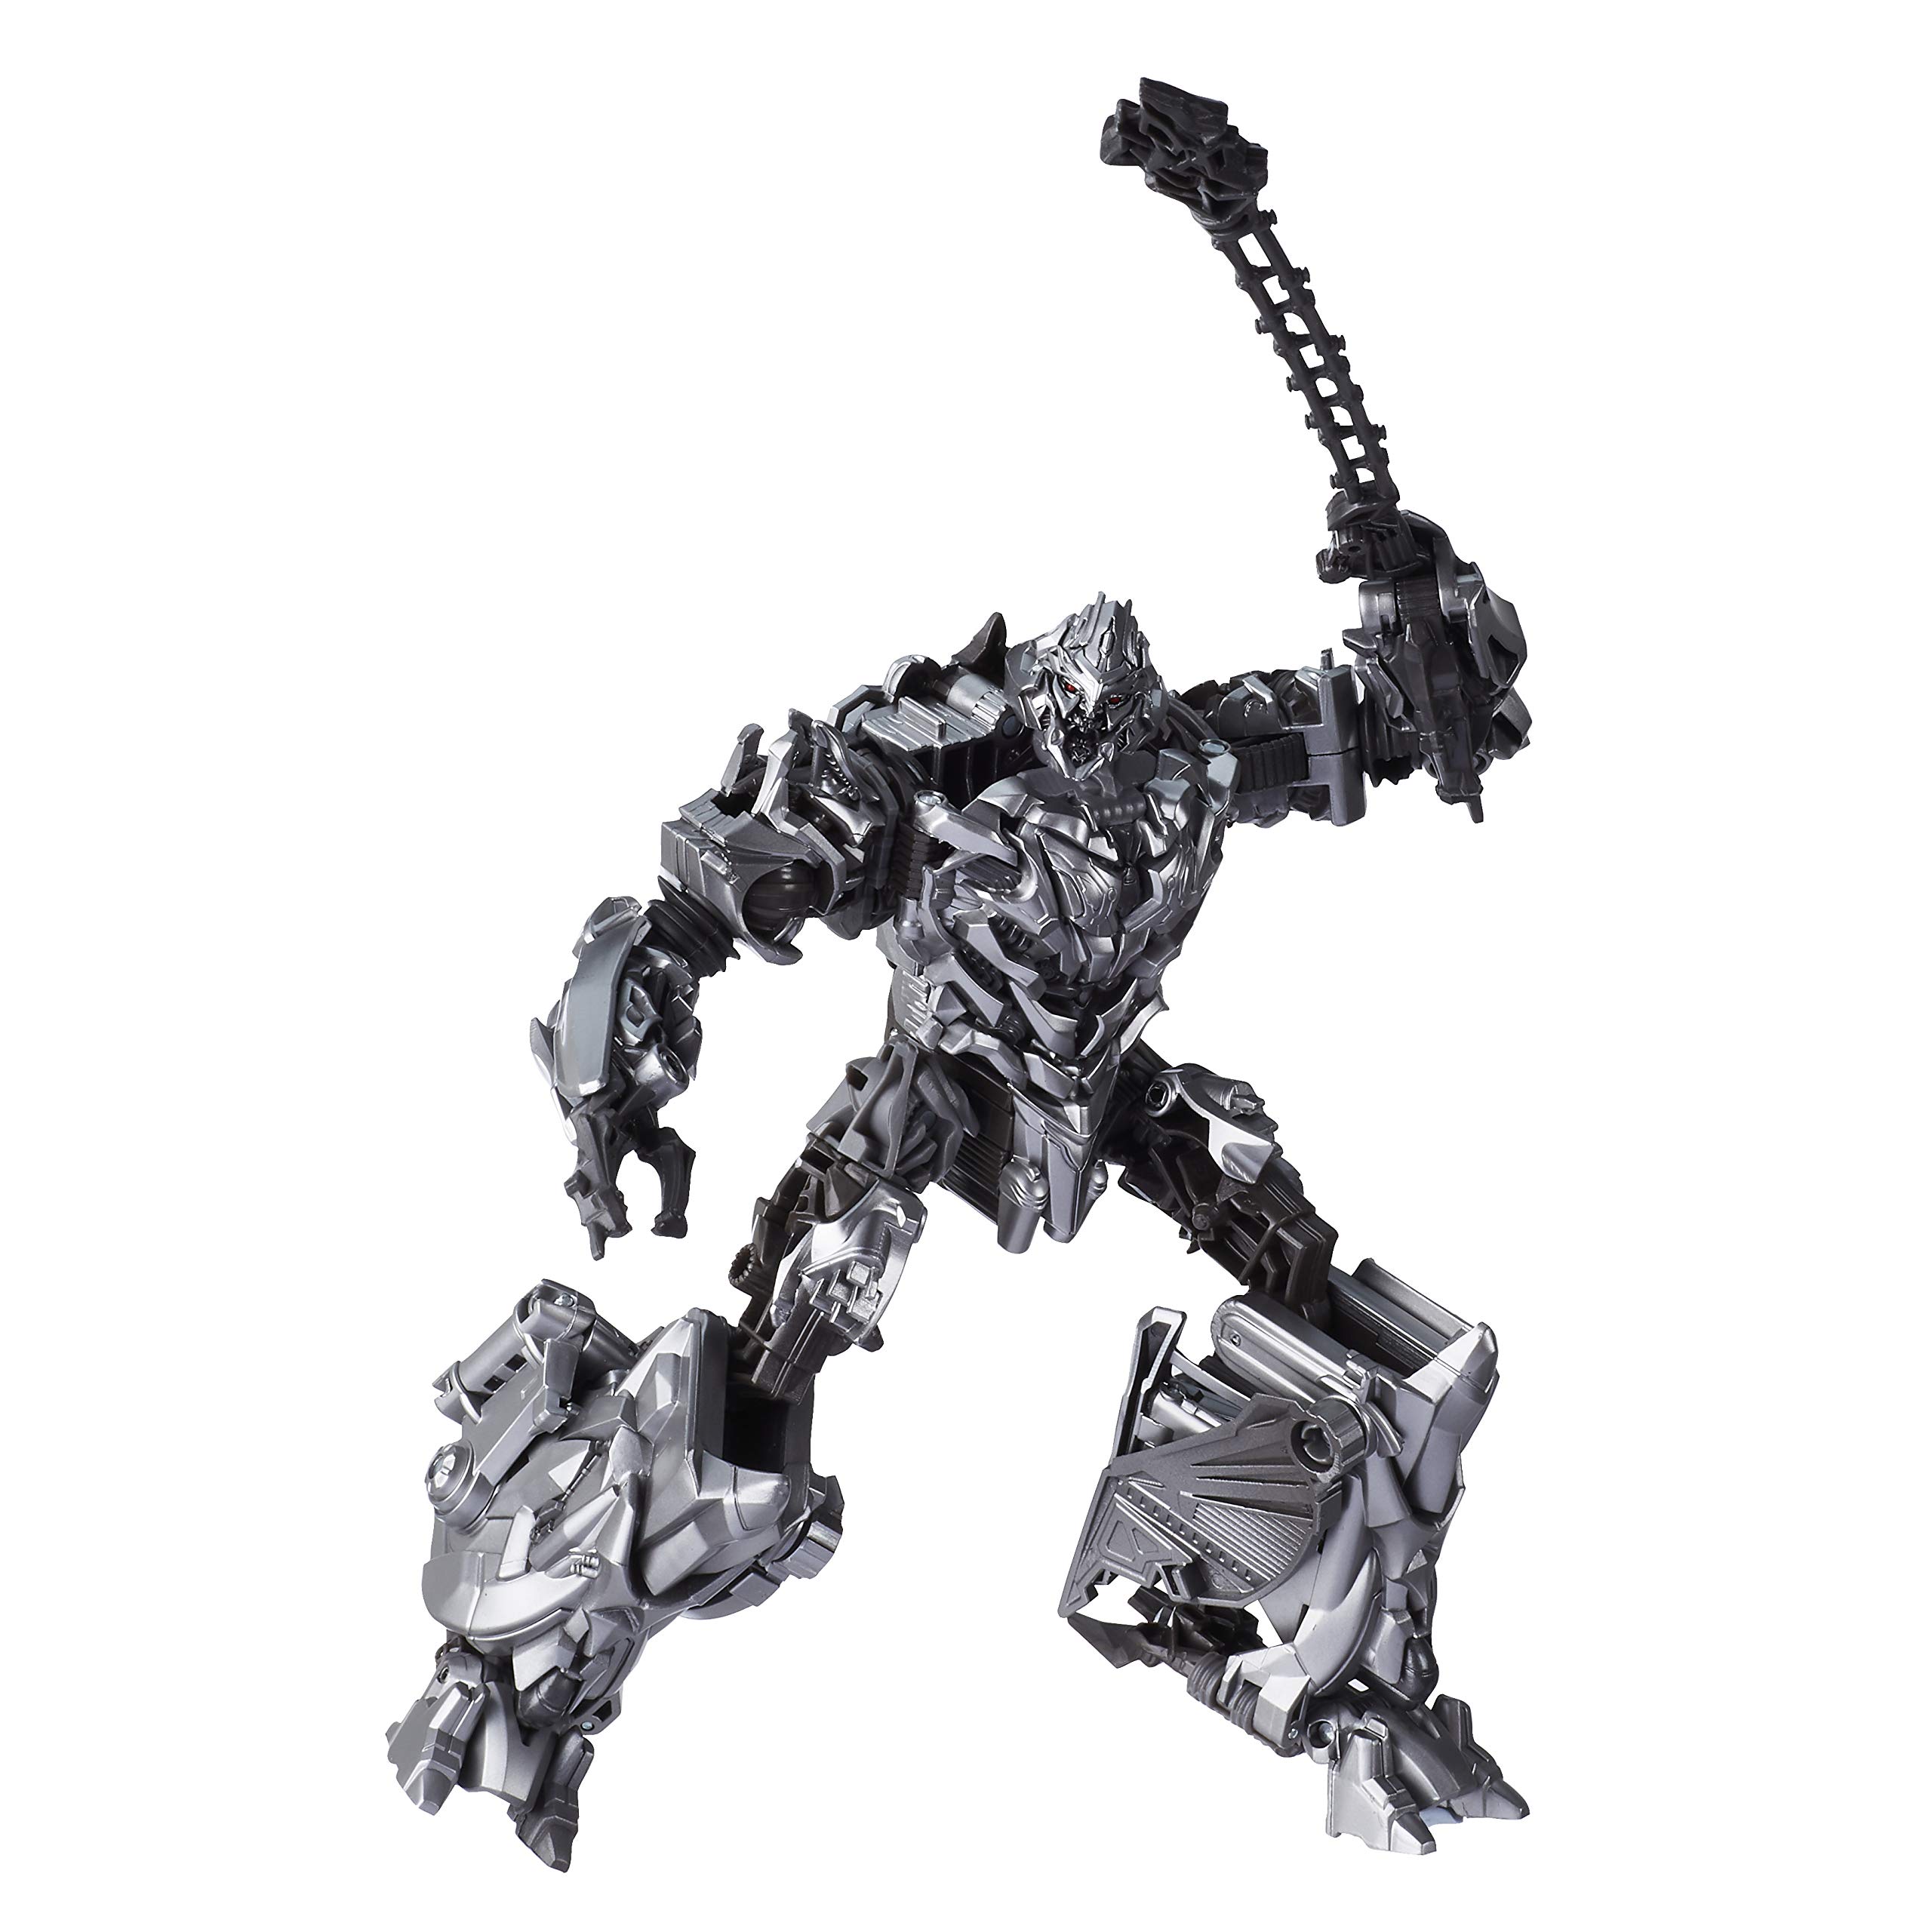 Transformers Toys Studio Series 54 Voyager Class Movie 1 Megatron Action Figure - Ages 8 & Up, 6.5